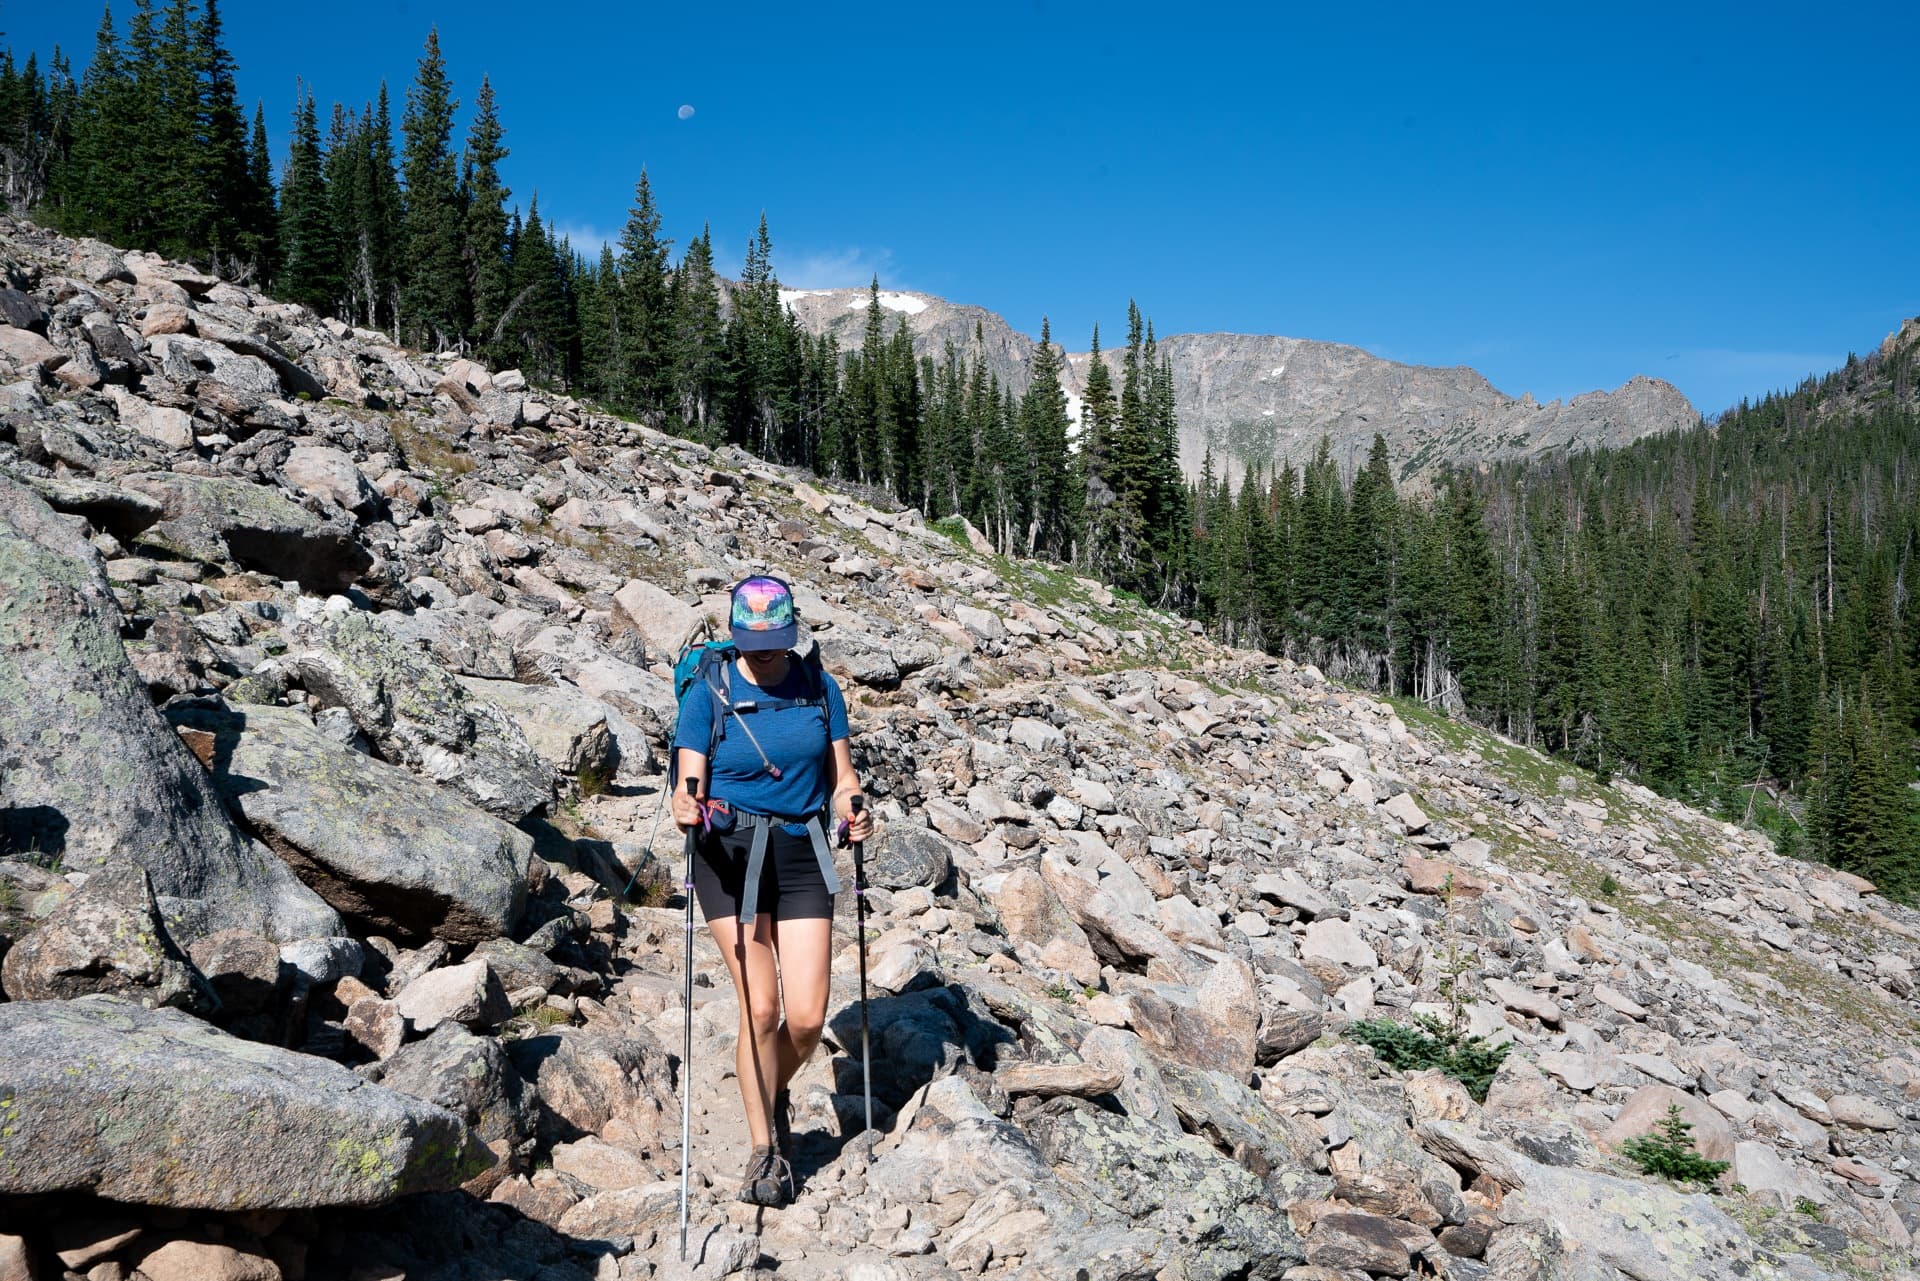 Get our top tips for visiting Rocky Mountain National Park including when to go, where to camp, hiking tips, how to beat the crowds, and more.